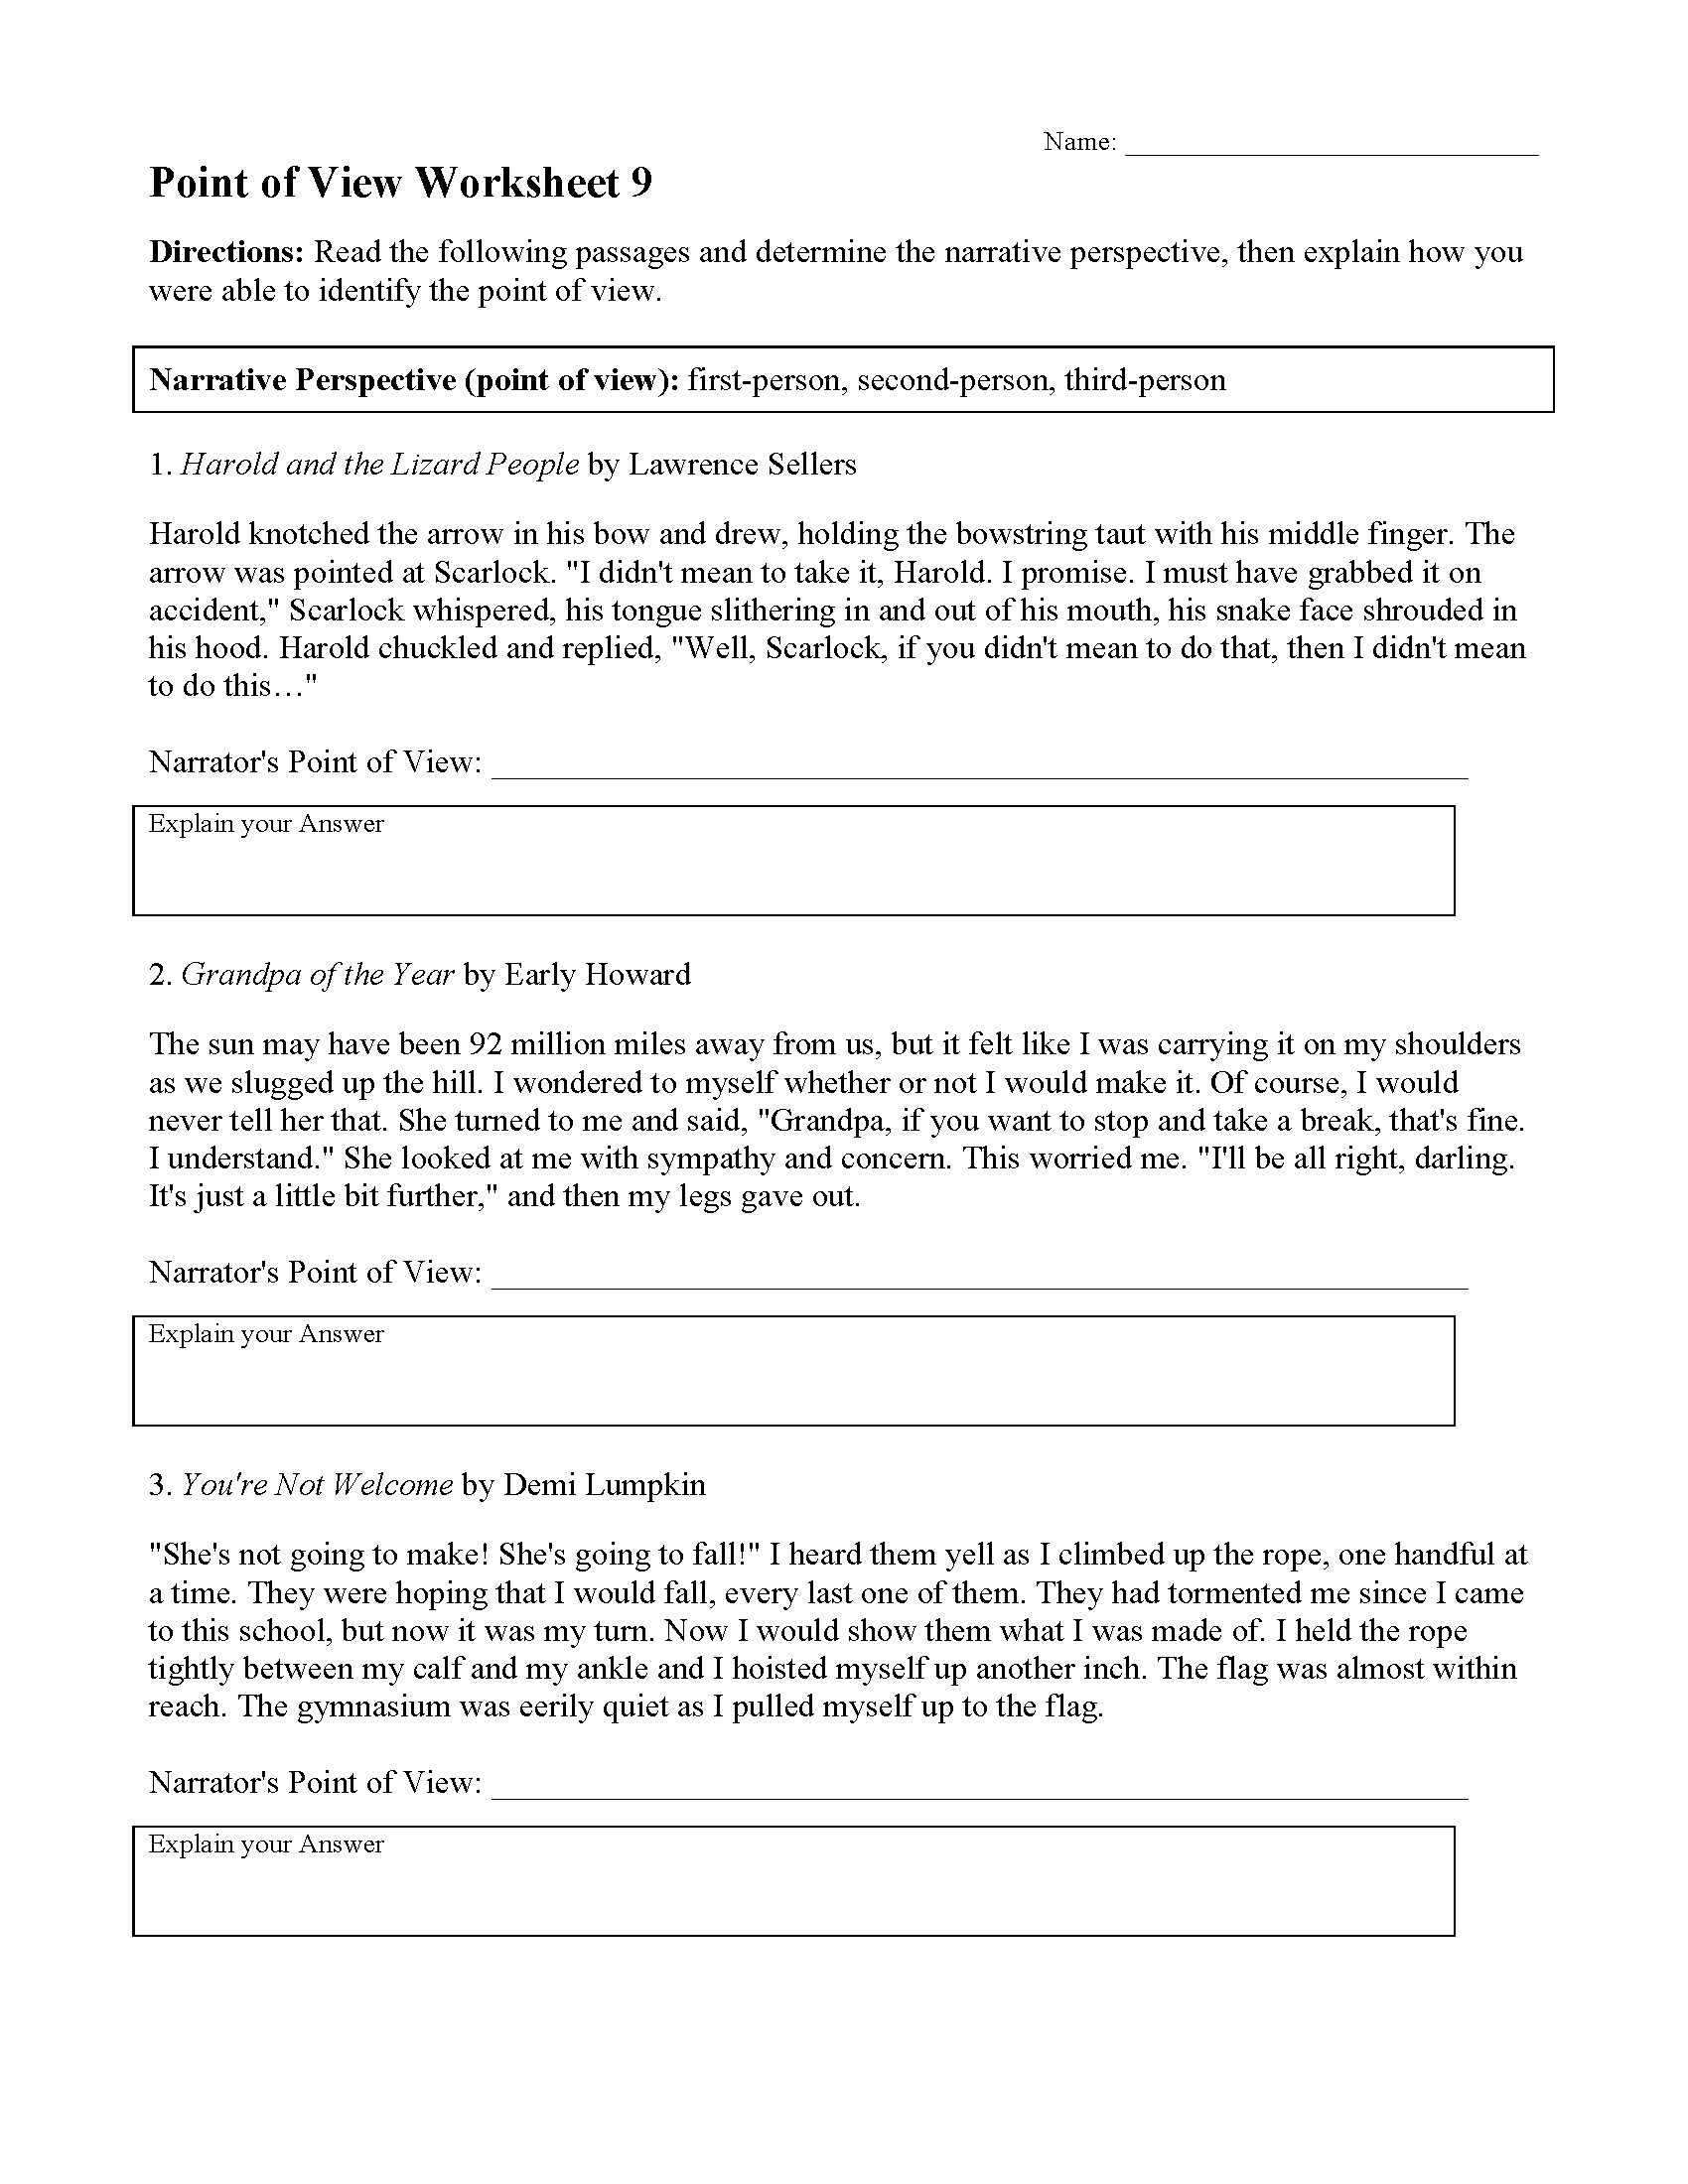 Point of View Worksheet 11  Preview Inside Point Of View Worksheet